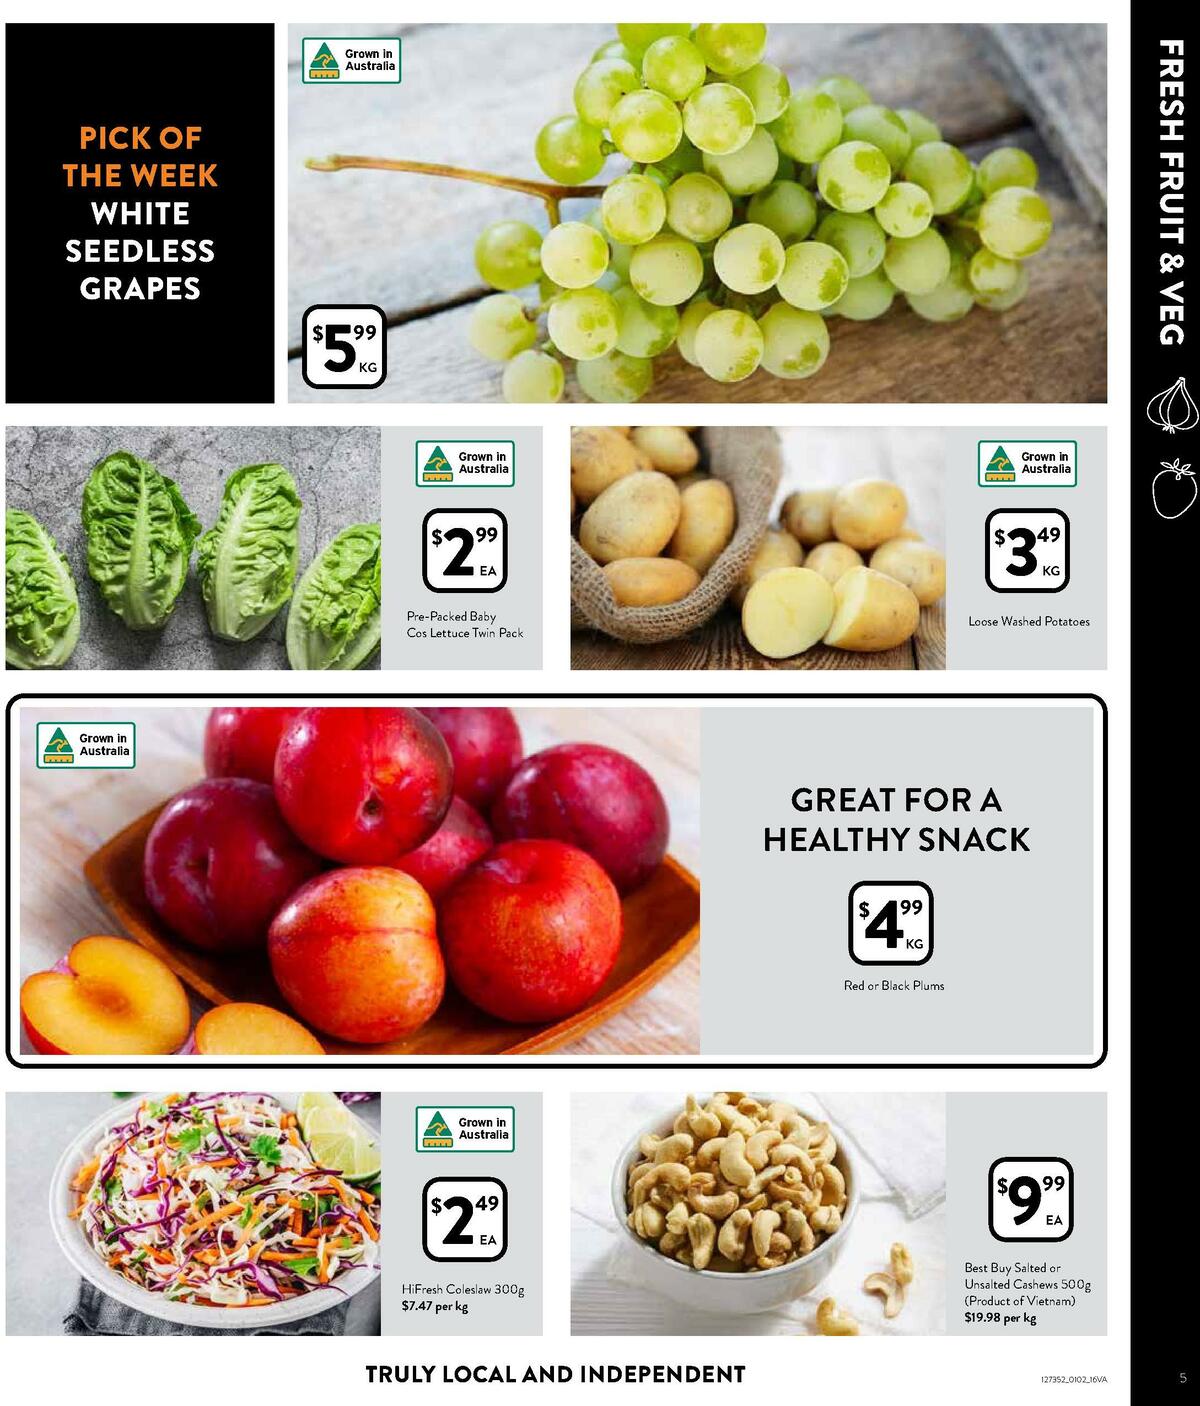 FoodWorks Supermarket Catalogues from 1 February